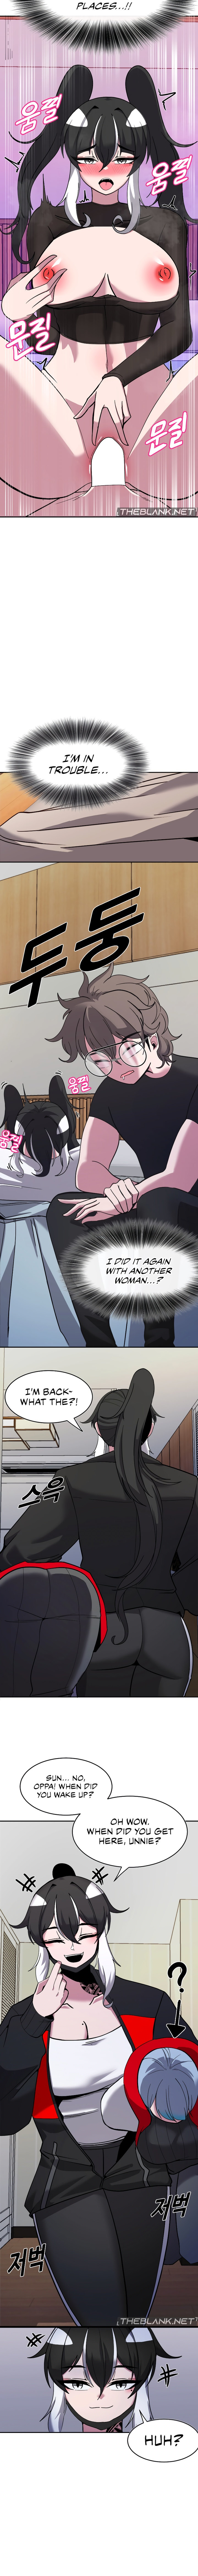 Double Life of Gukbap - Chapter 8 Page 6